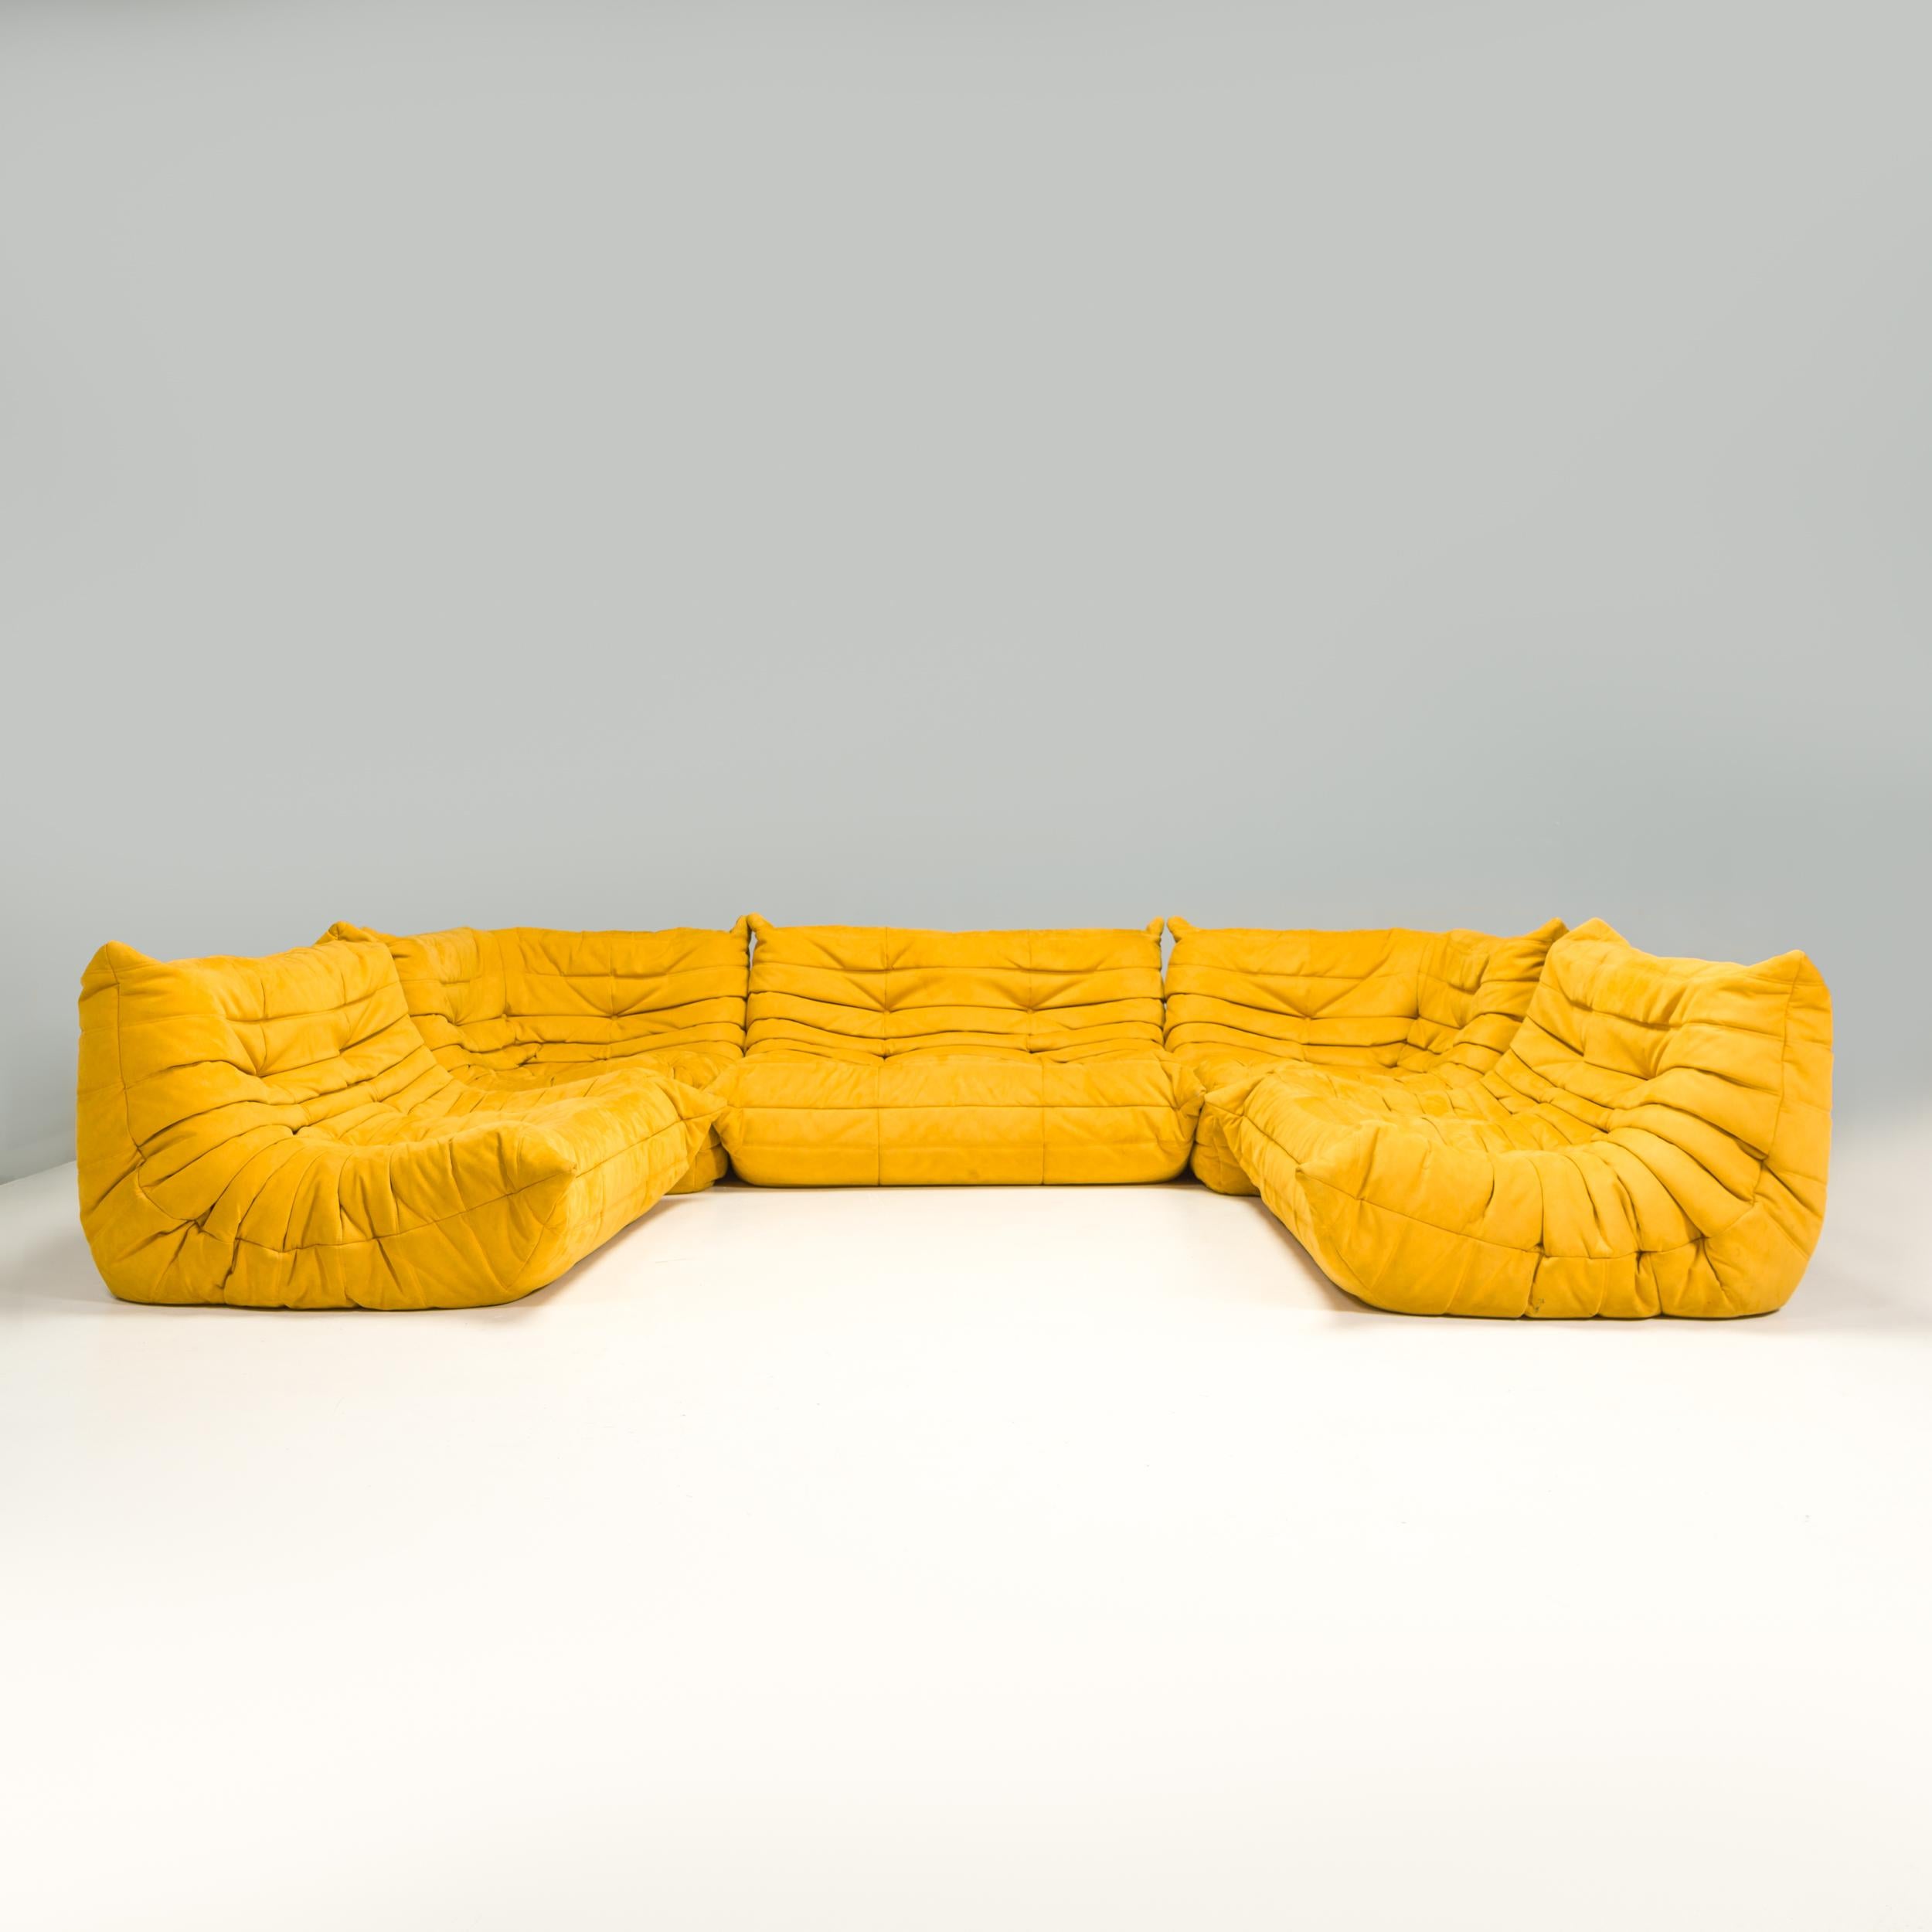 The iconic Togo sofa, originally designed by Michel Ducaroy for Ligne Roset in 1973 has become a design Classic.

This five piece modular set is incredibly versatile and can be configured into one large corner sofa or split for a multitude of